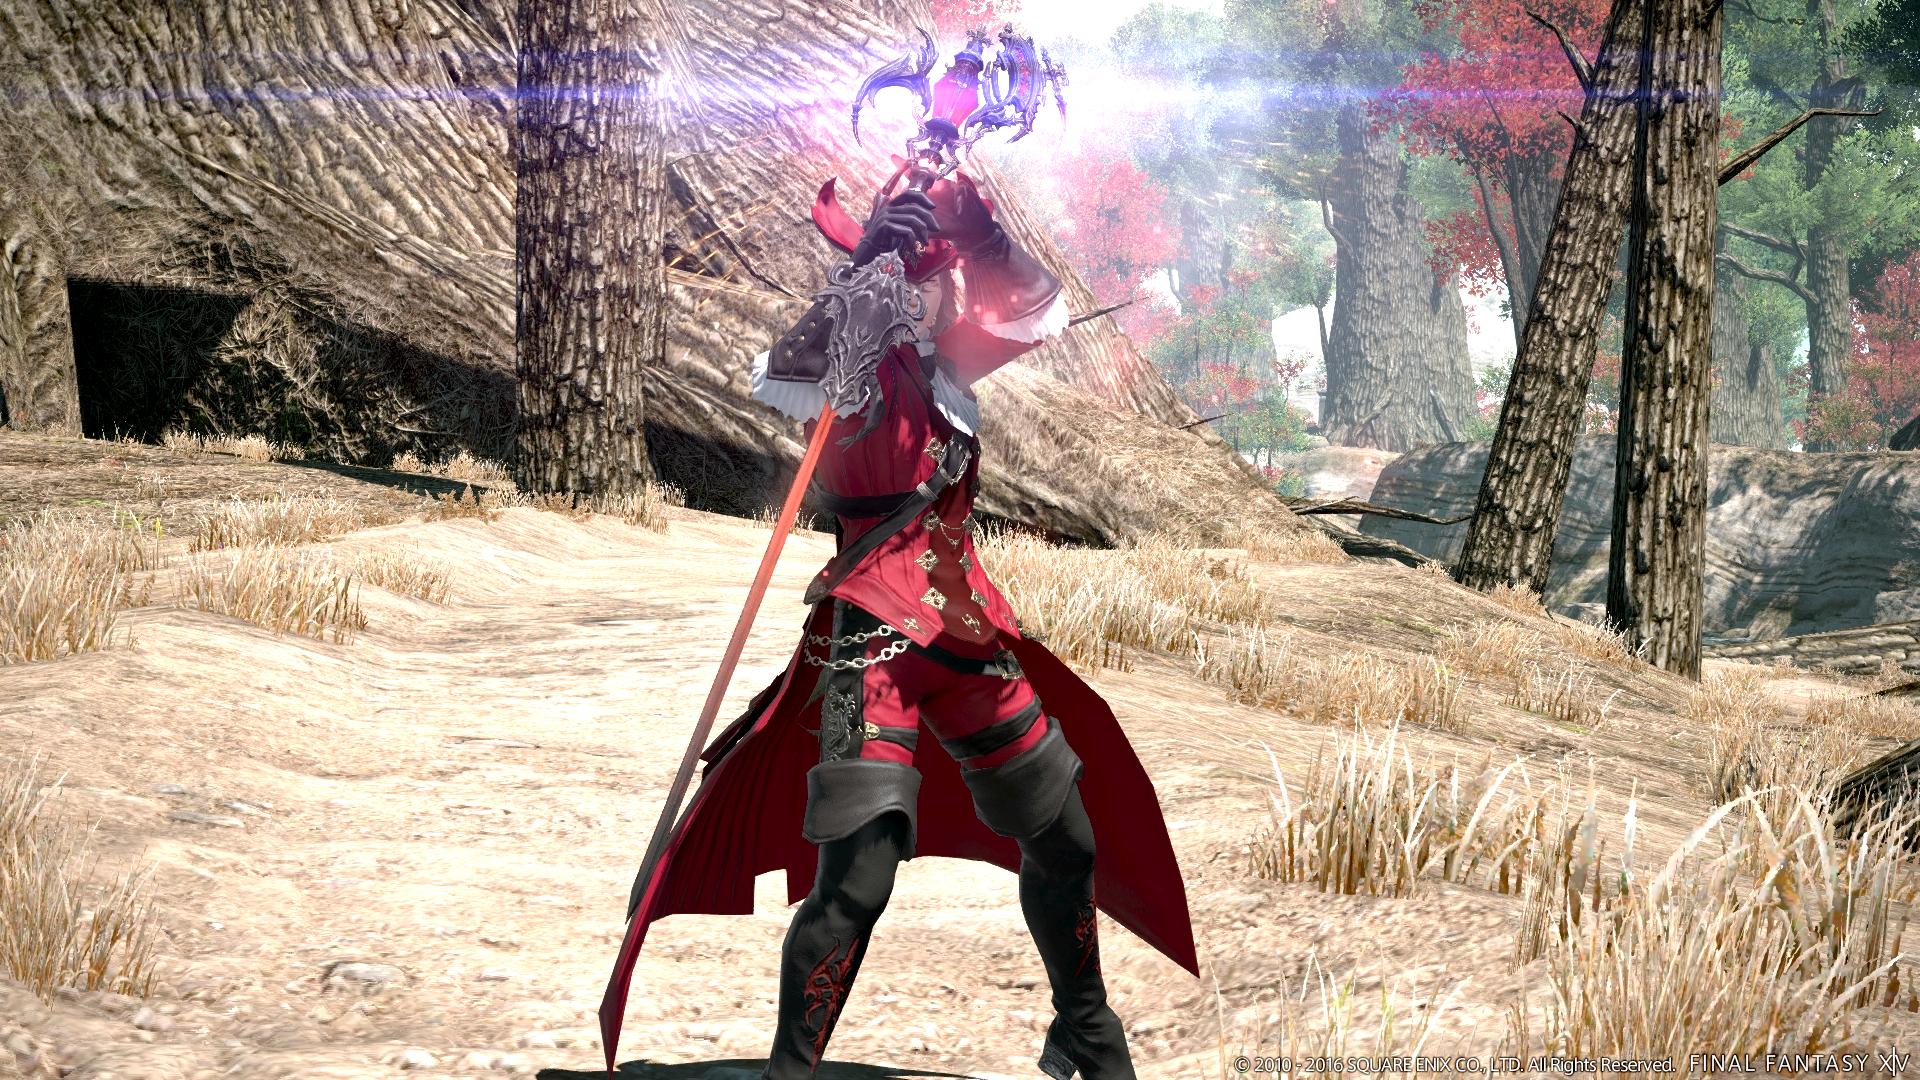 to Red Mage in FFXIV Online Dexerto